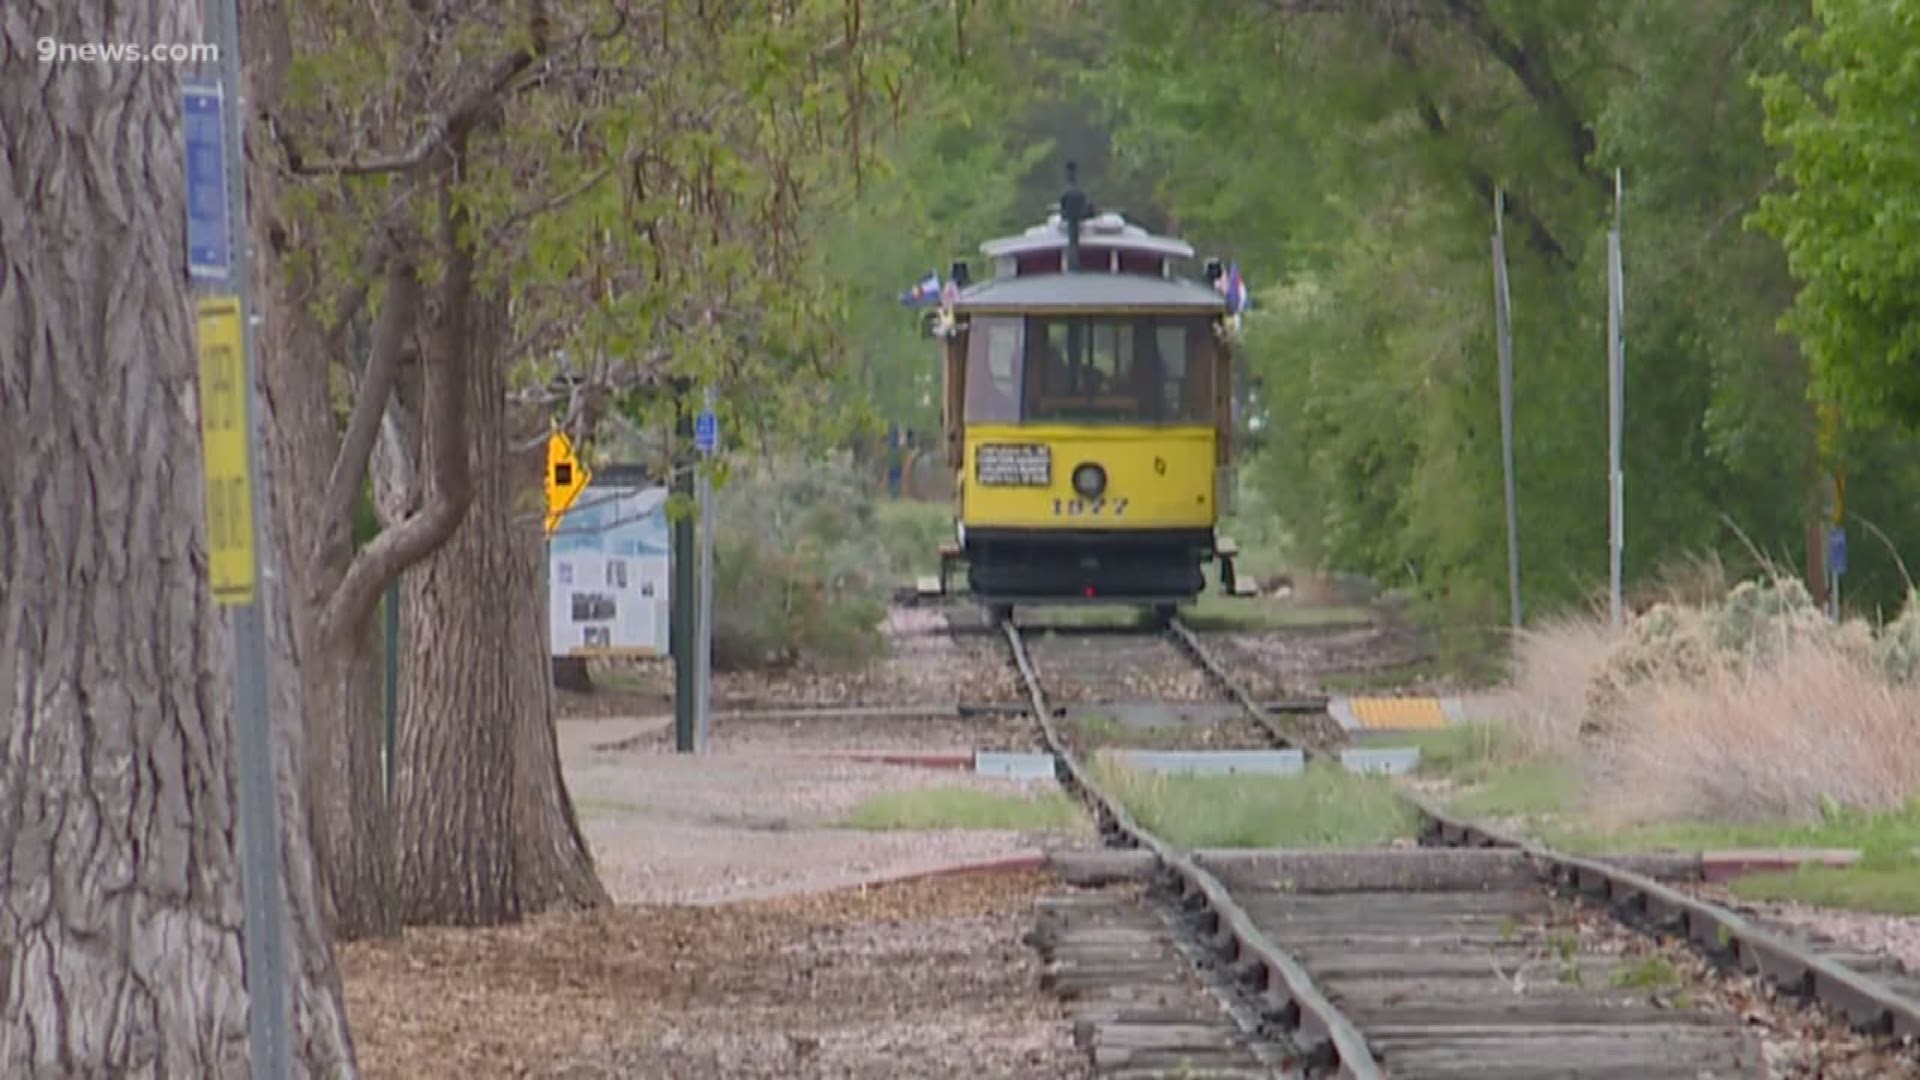 The Denver Trolley is the city's last operating trolley. It kicked off the season Thursday morning.